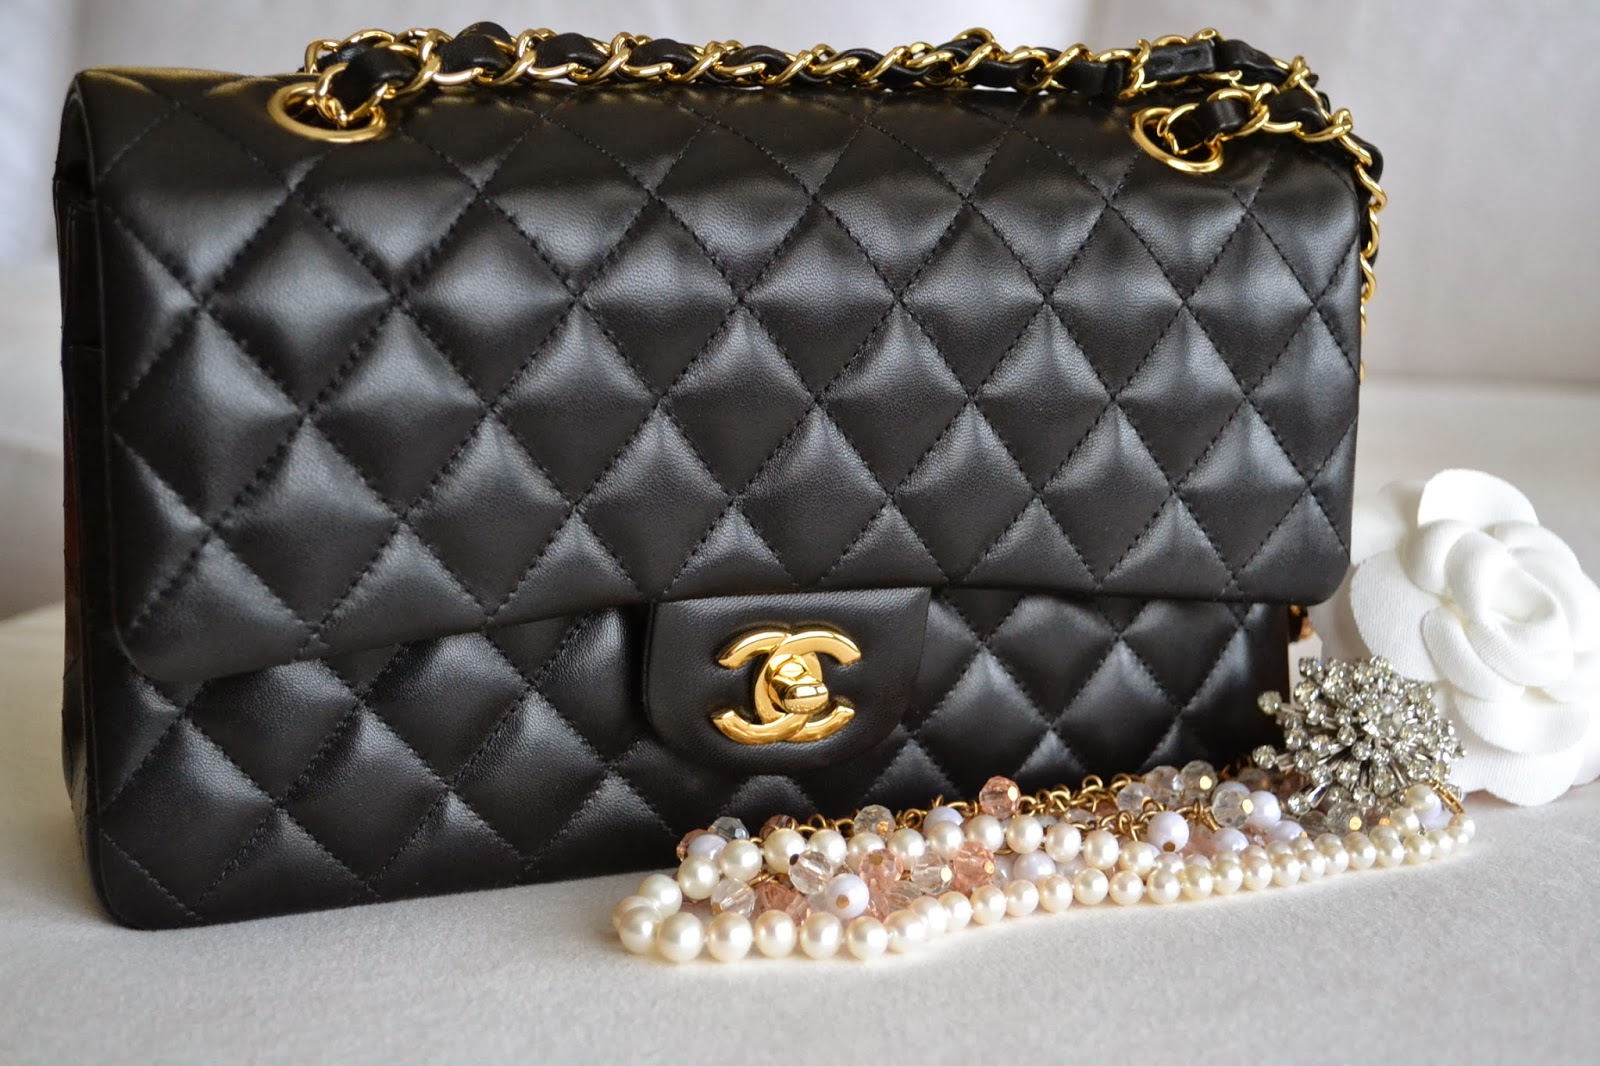 Chanel Rep Guide! - posted in the RepLadies community